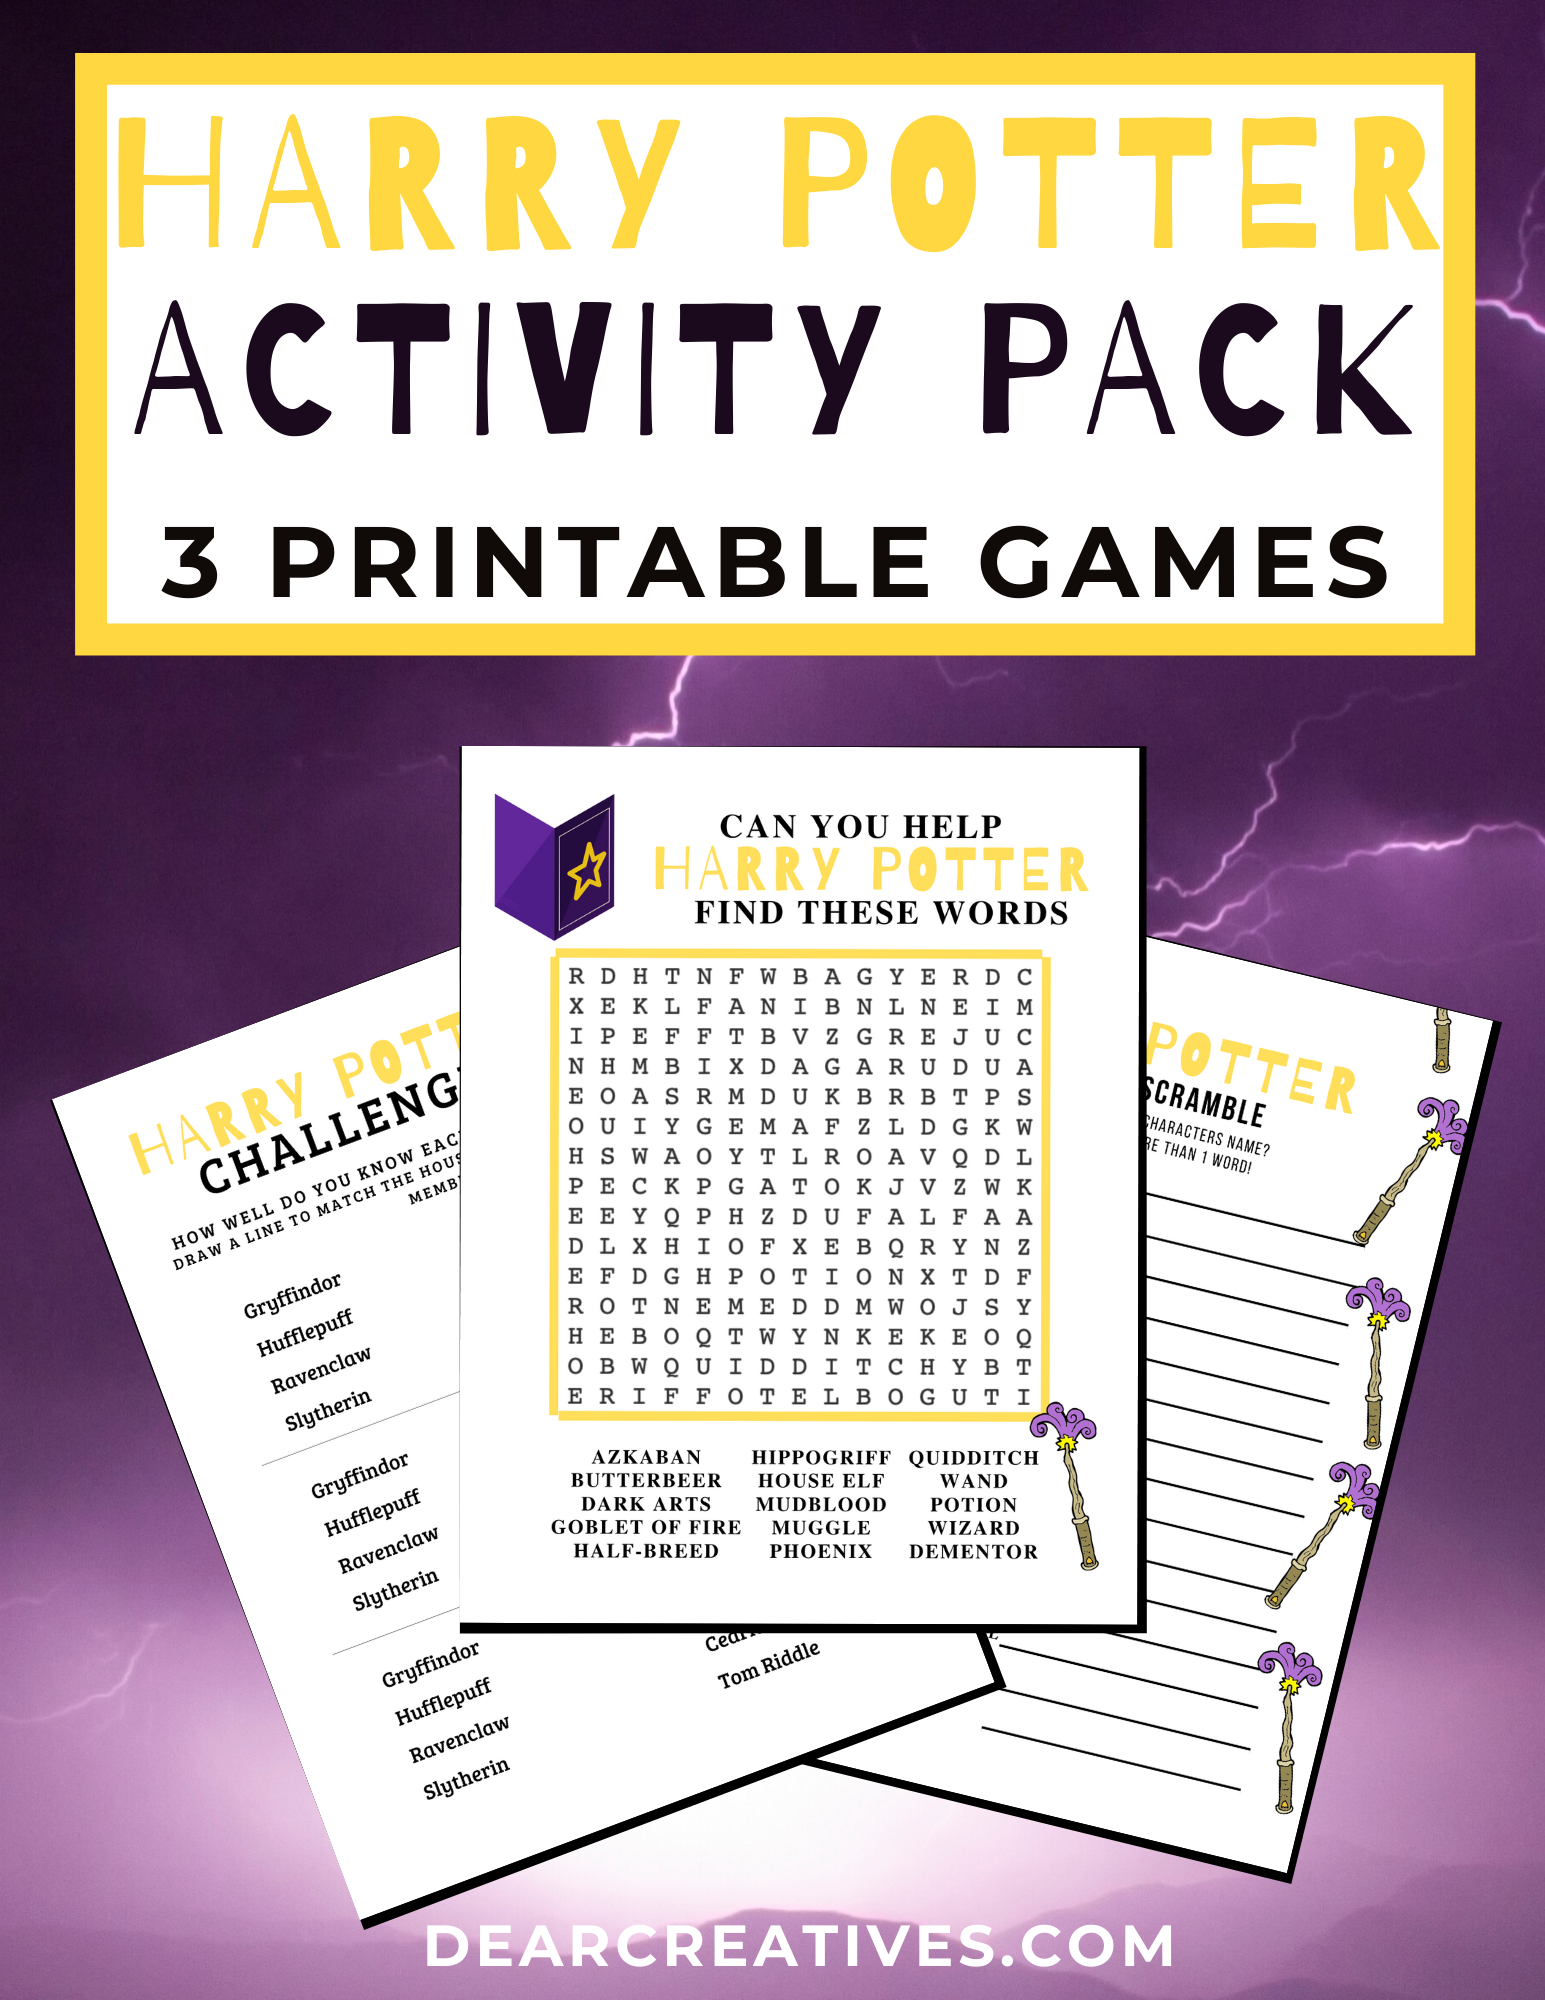 Harry Potter Printables - Word Scramble - Character Scramble these fun Harry Potter activities come with the answer key and are in a free printable Activity Pack -Grab them, print and have fun! DearCreatives.com